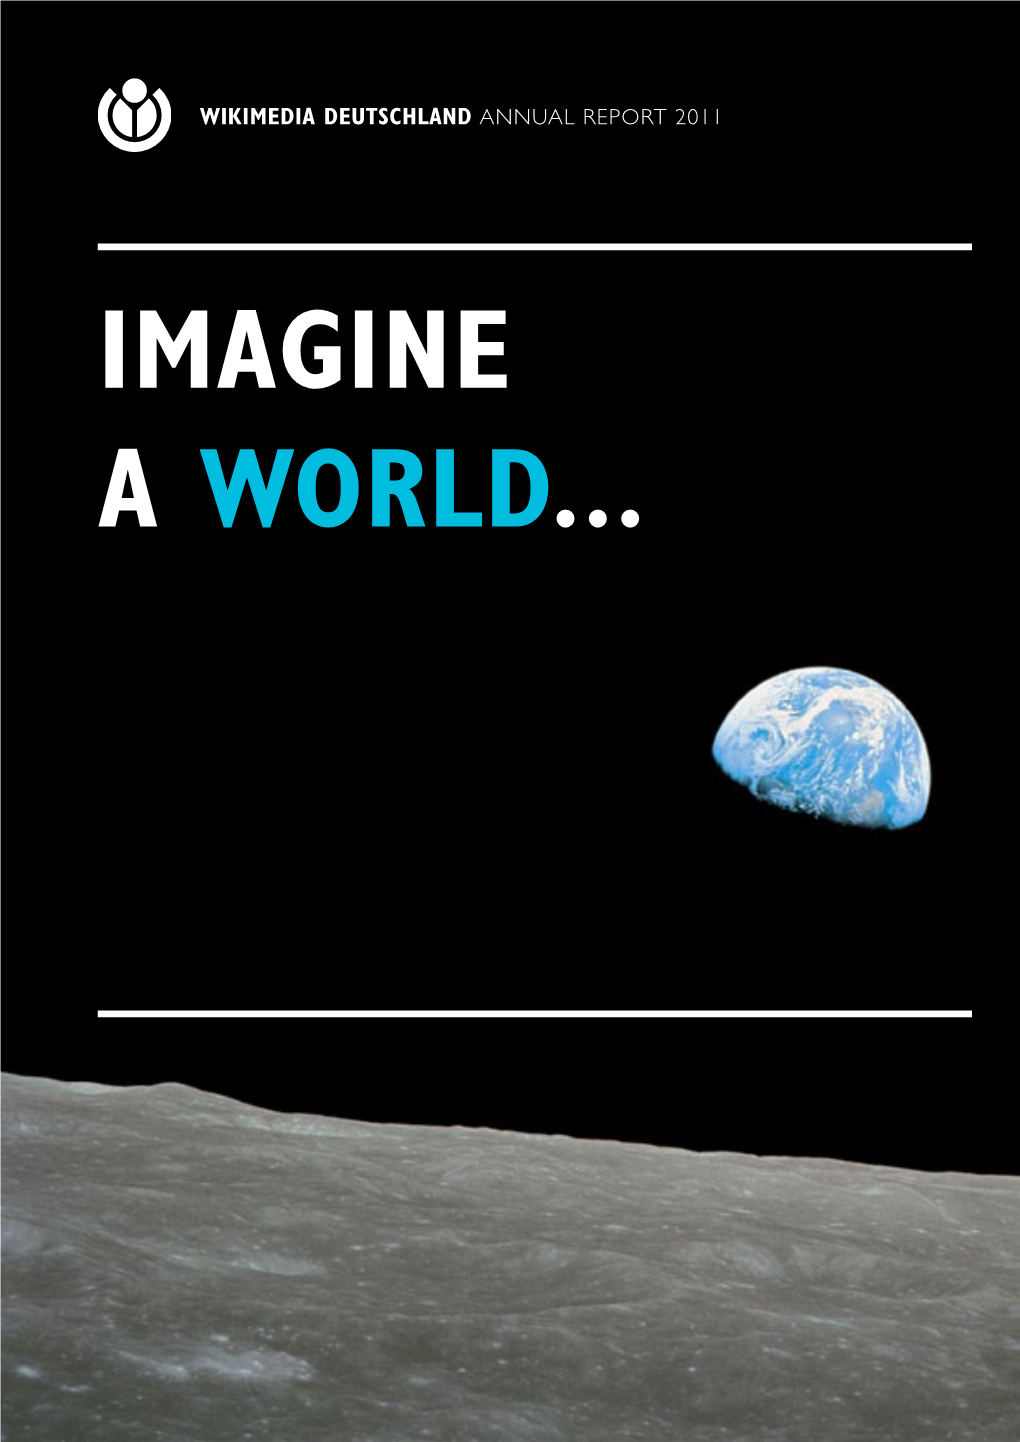 Imagine a World... …In Which EVERY SINGLE HUMAN BEING CAN FREELY SHARE in the SUM of ALL KNOWLEDGE